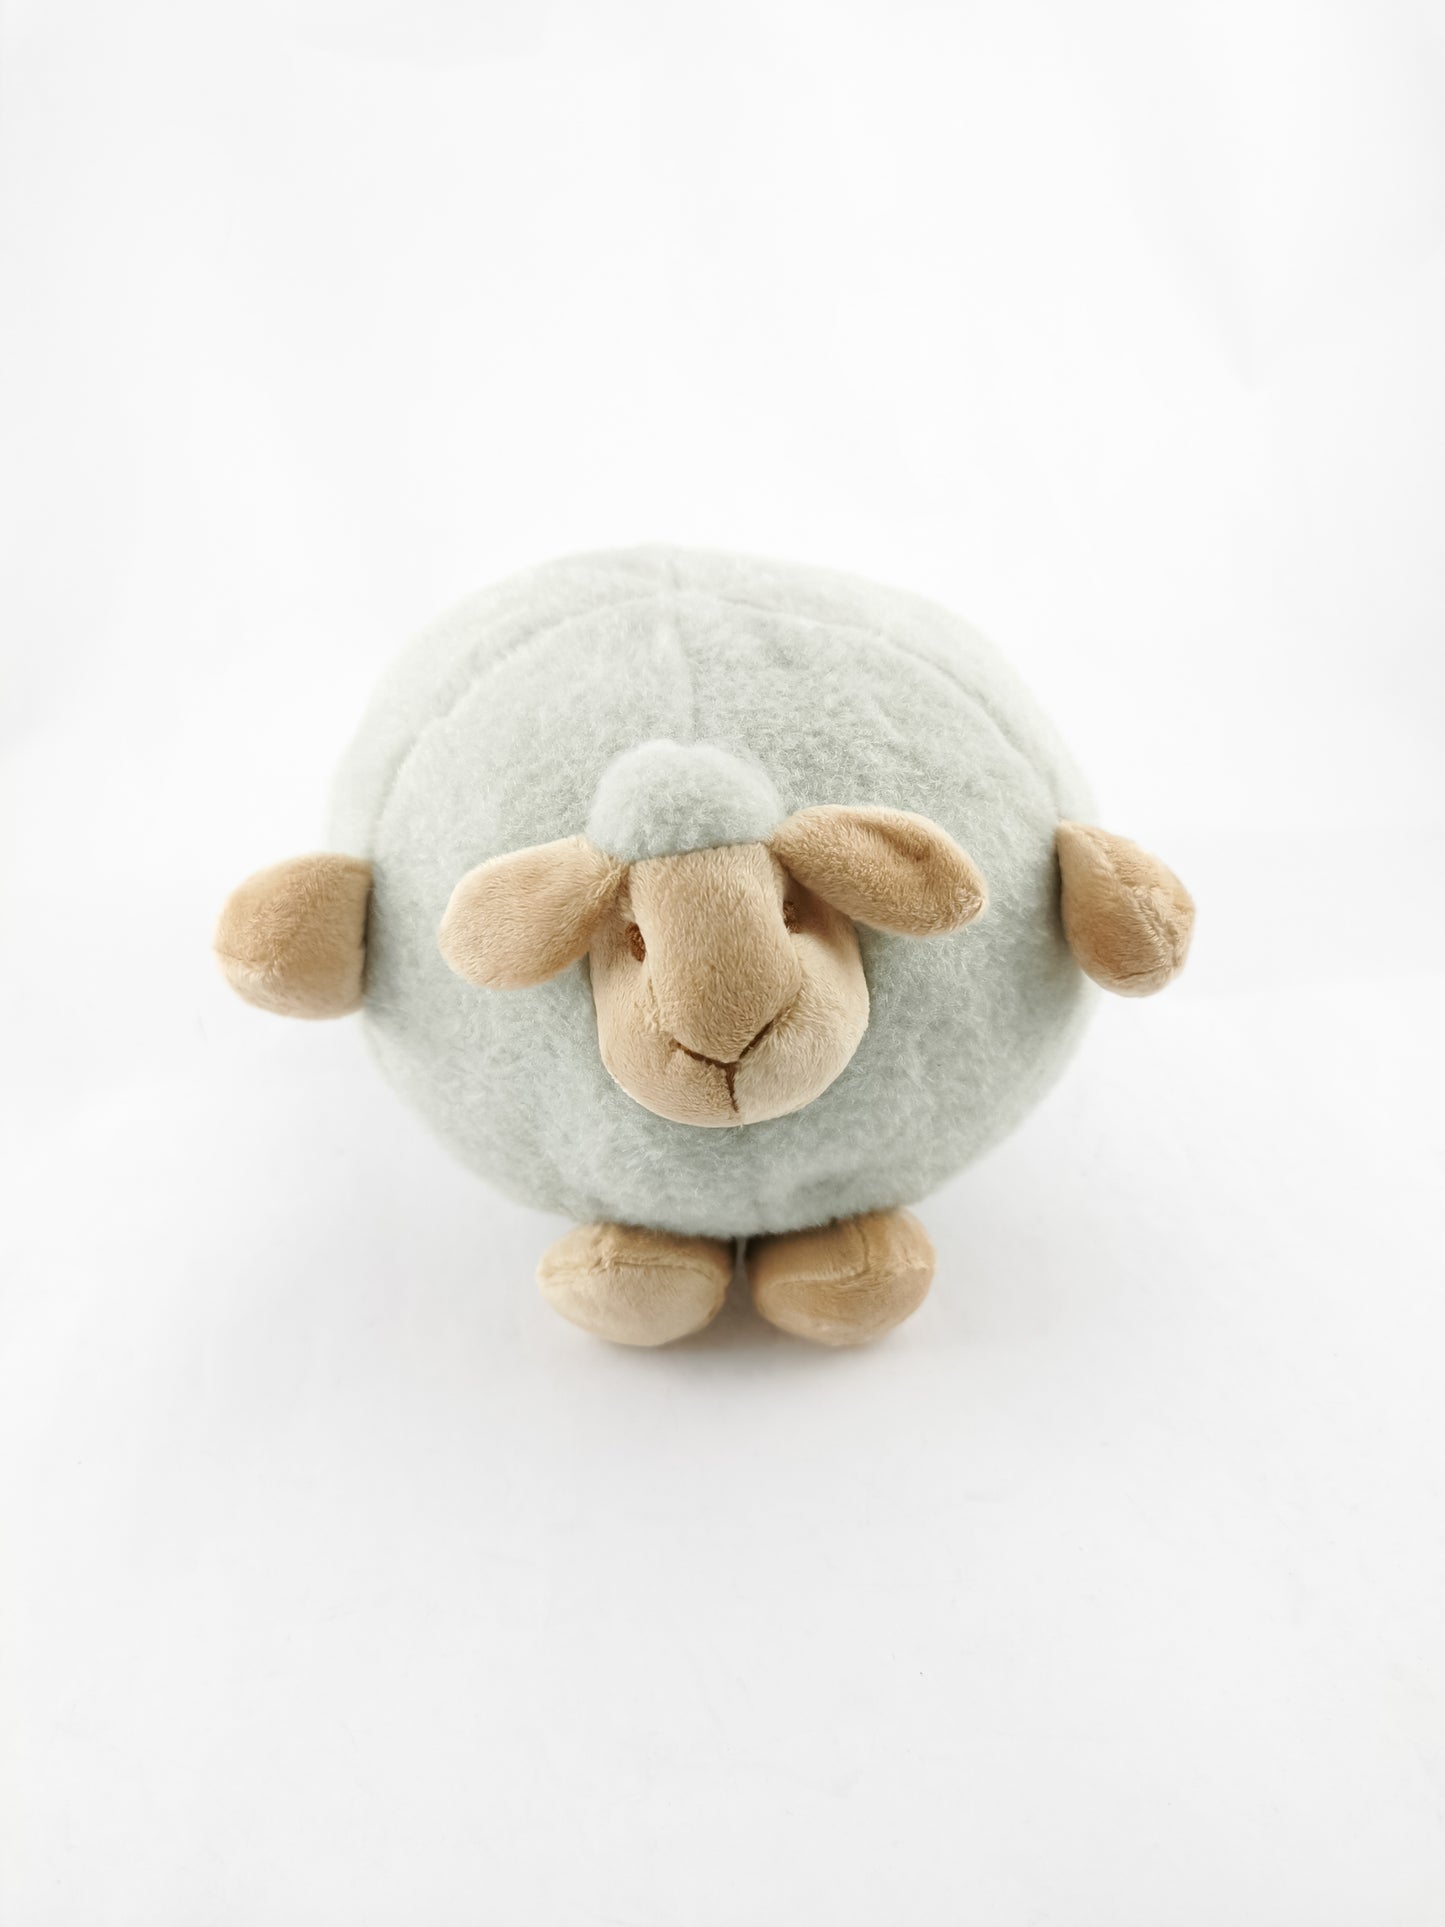 Round de Sheep Plush Toy - Small -  Green - Gifts by Art Tree